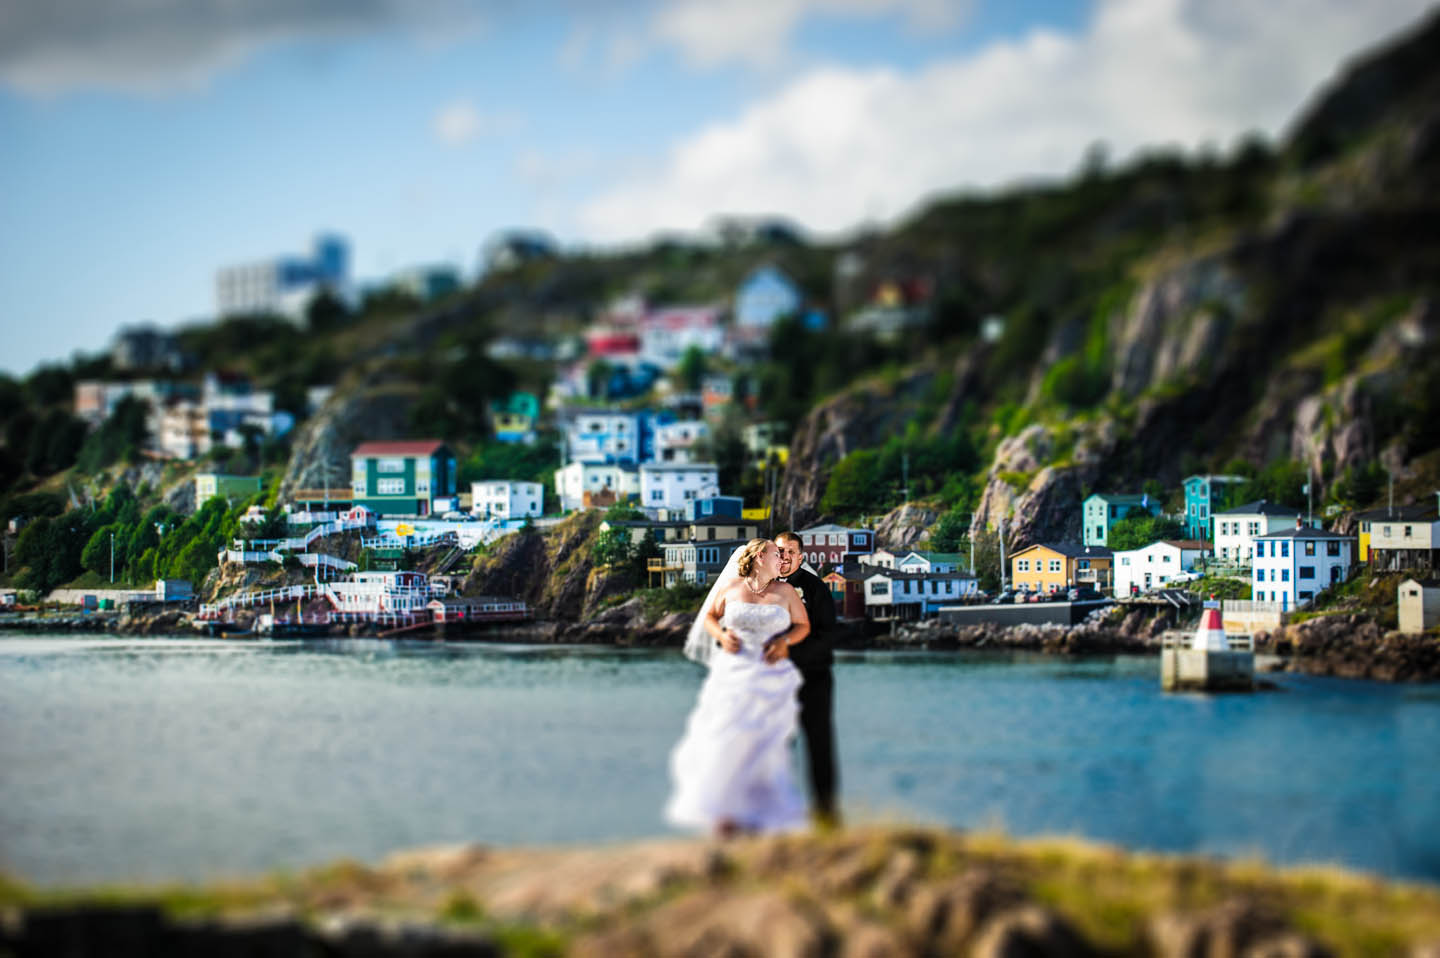 With the colorful outer battery of St. John's a bride and groom embrace on the rocks for a wedding photo.